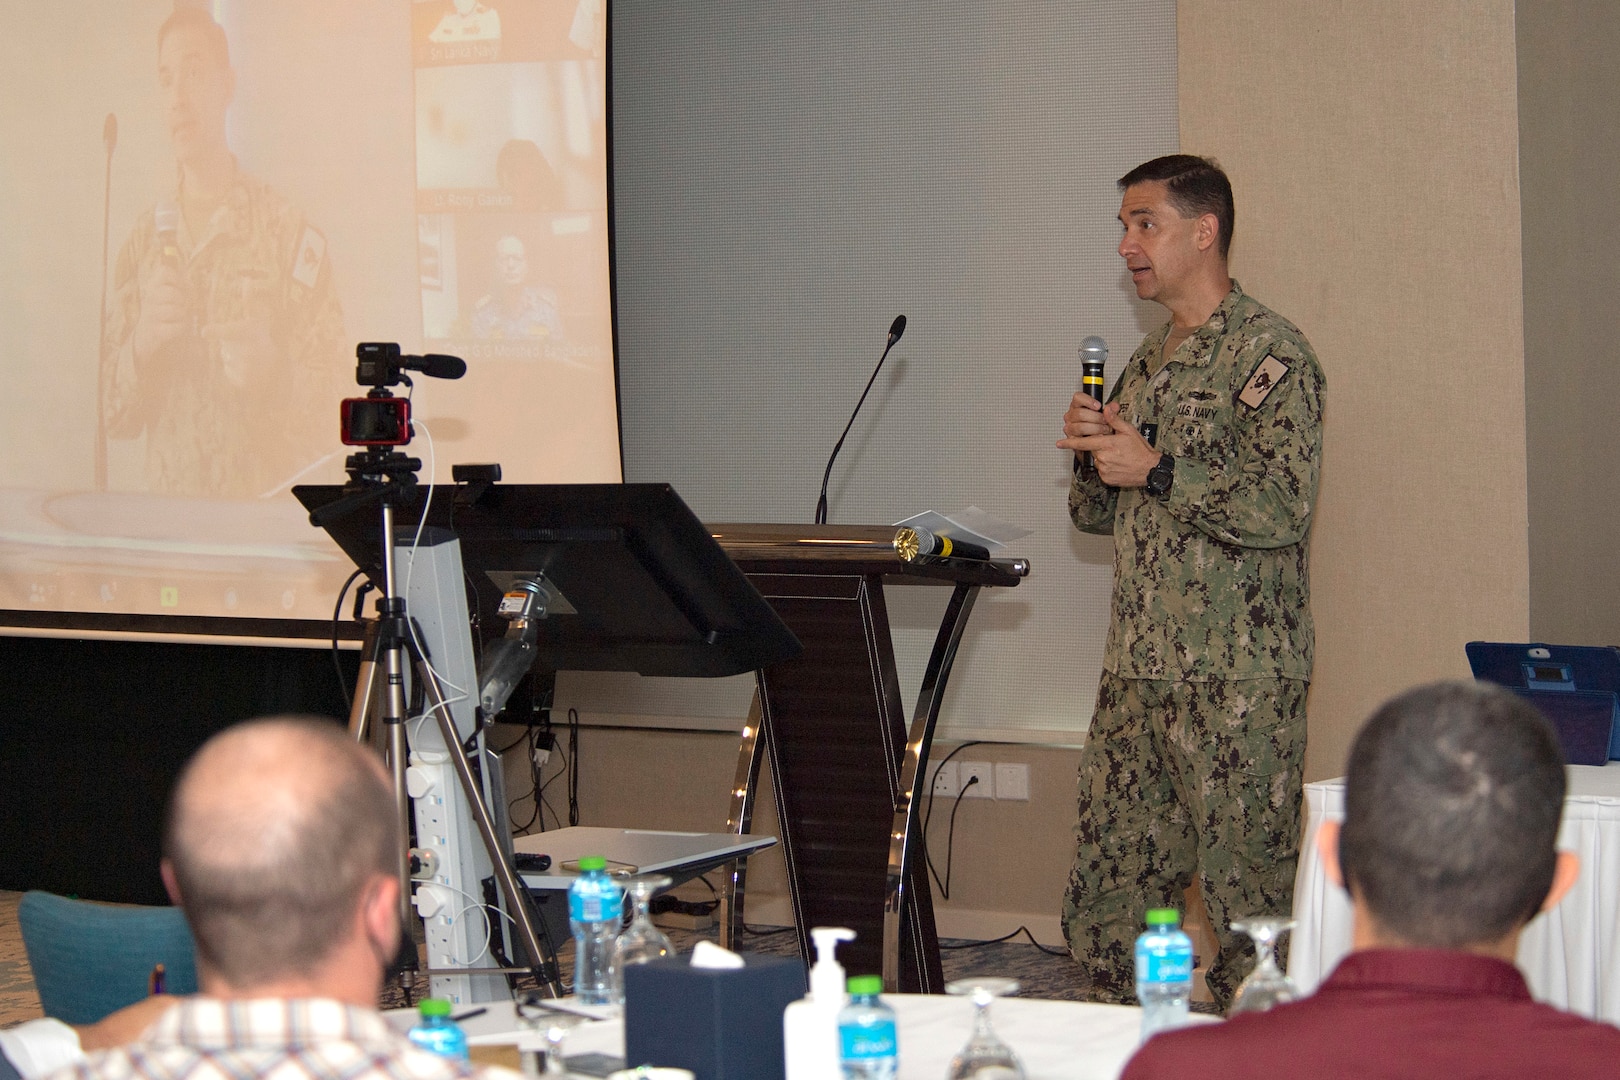 MANAMA, Bahrain (Aug. 16, 2021) - Vice Adm. Brad Cooper, commander of U.S. Naval Forces Central Command (NAVCENT), U.S. 5thFleet and Combined Maritime Forces, gives opening remarks during the International Maritime Exercise (IMX) 22 Main Planning Conference in Manama, Bahrain, Aug. 16, 2021. IMX 22 is designed to demonstrate global resolve to maintain freedom of navigation and the free flow of maritime commerce; and to build interoperability and familiarity with maritime security partners. (U.S. Navy

Photo by Mass Communication Specialist 2nd Class Anita Chebahtah)